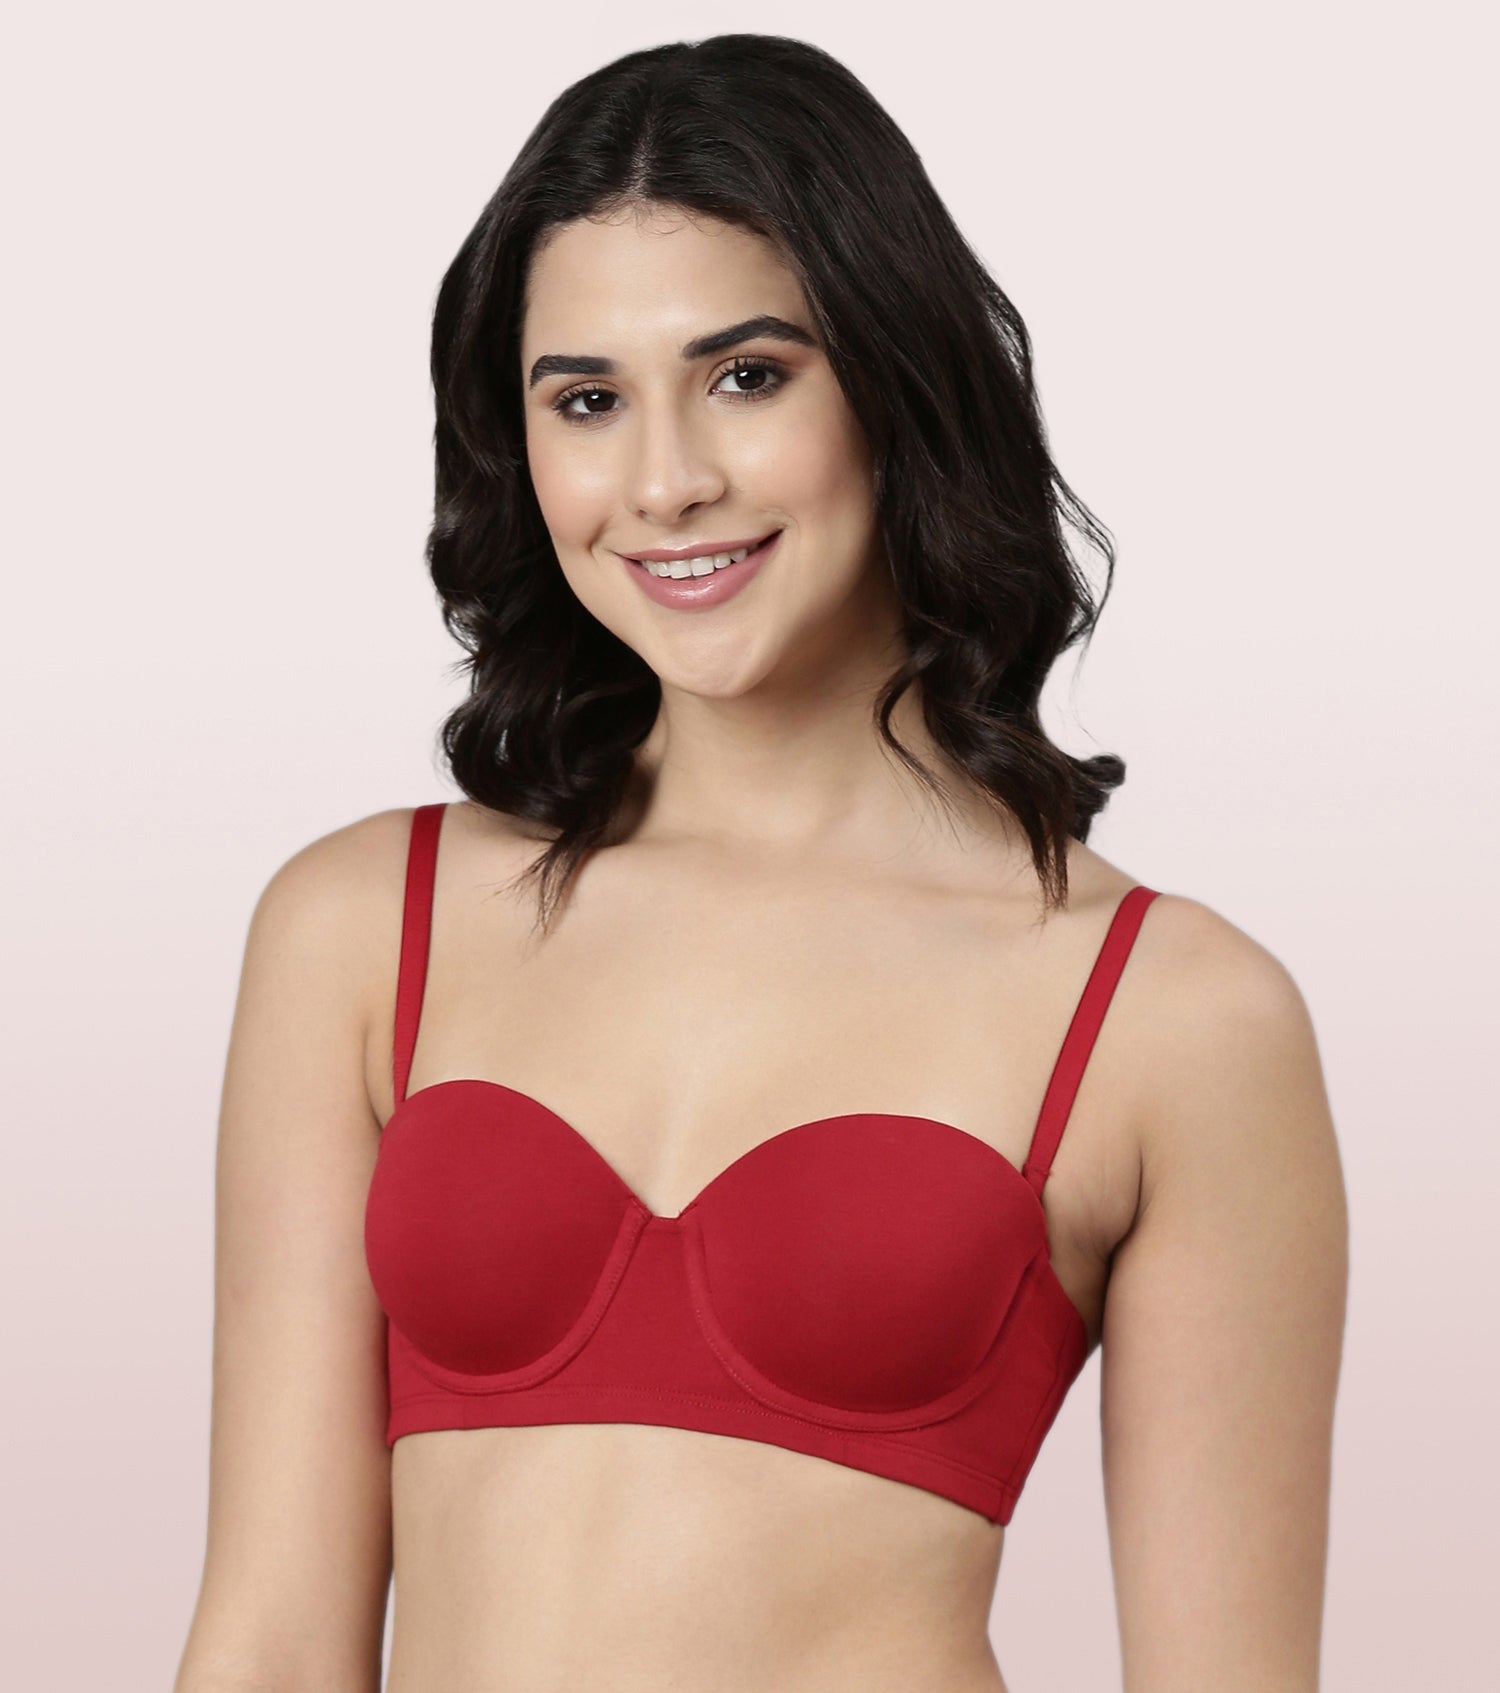 Enamor Multiway Bra For Women | High Coverage Cotton Strapless Bra For No Spill Coverage | A078Enamor Multiway Bra For Women | High Coverage Cotton Strapless Bra For No Spill Coverage | A078